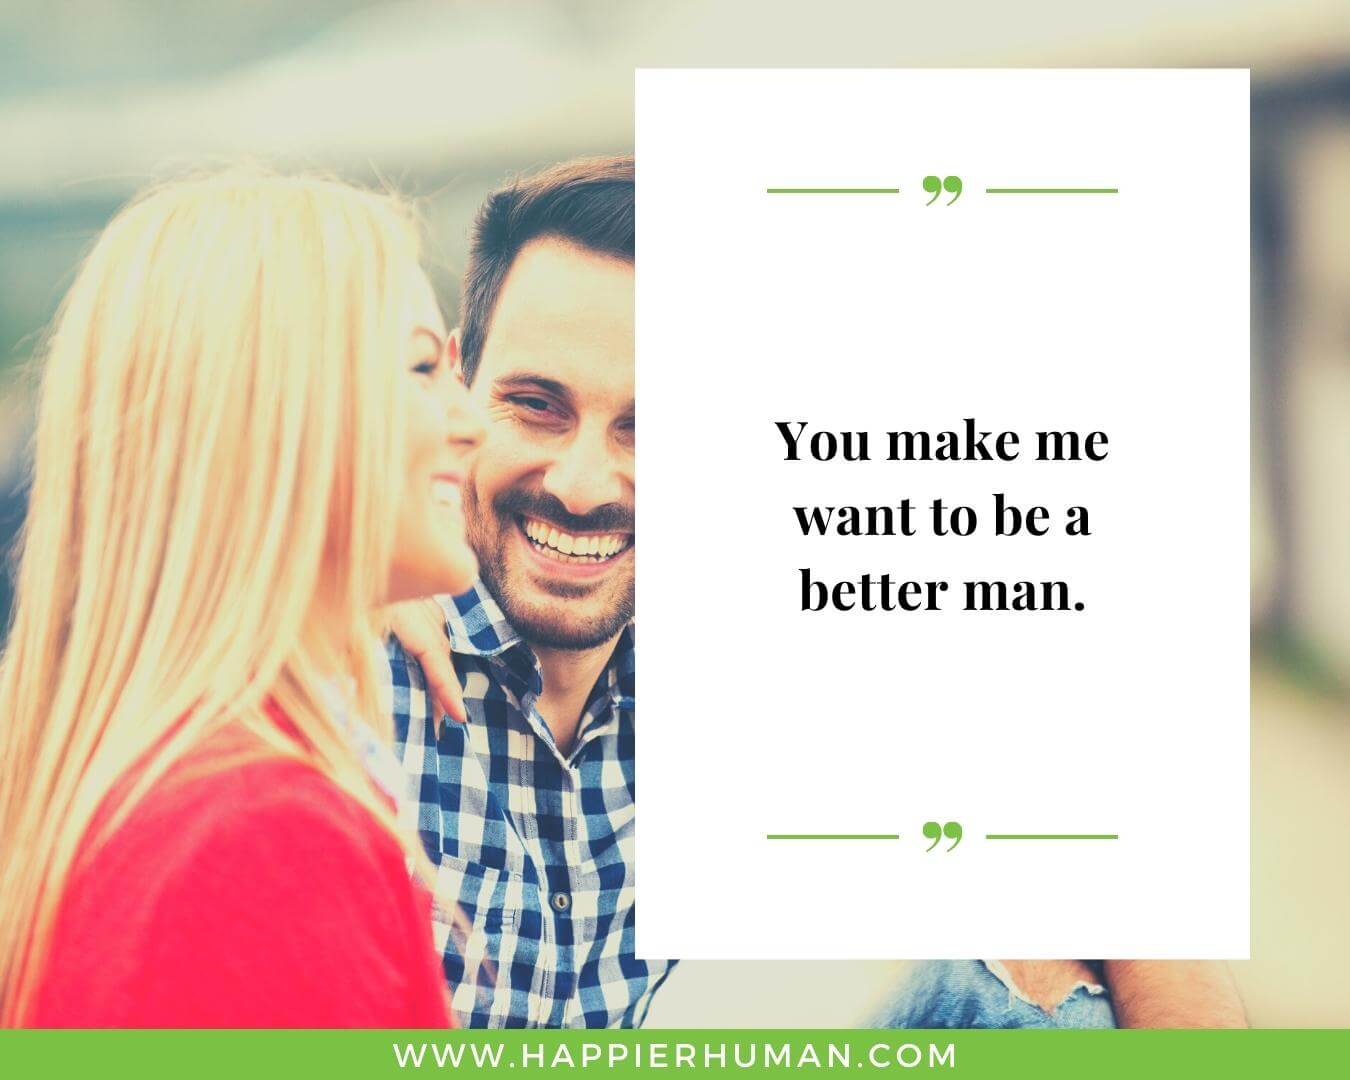 Short romantic Quotes For Wife - “You make me want to be a better man.”